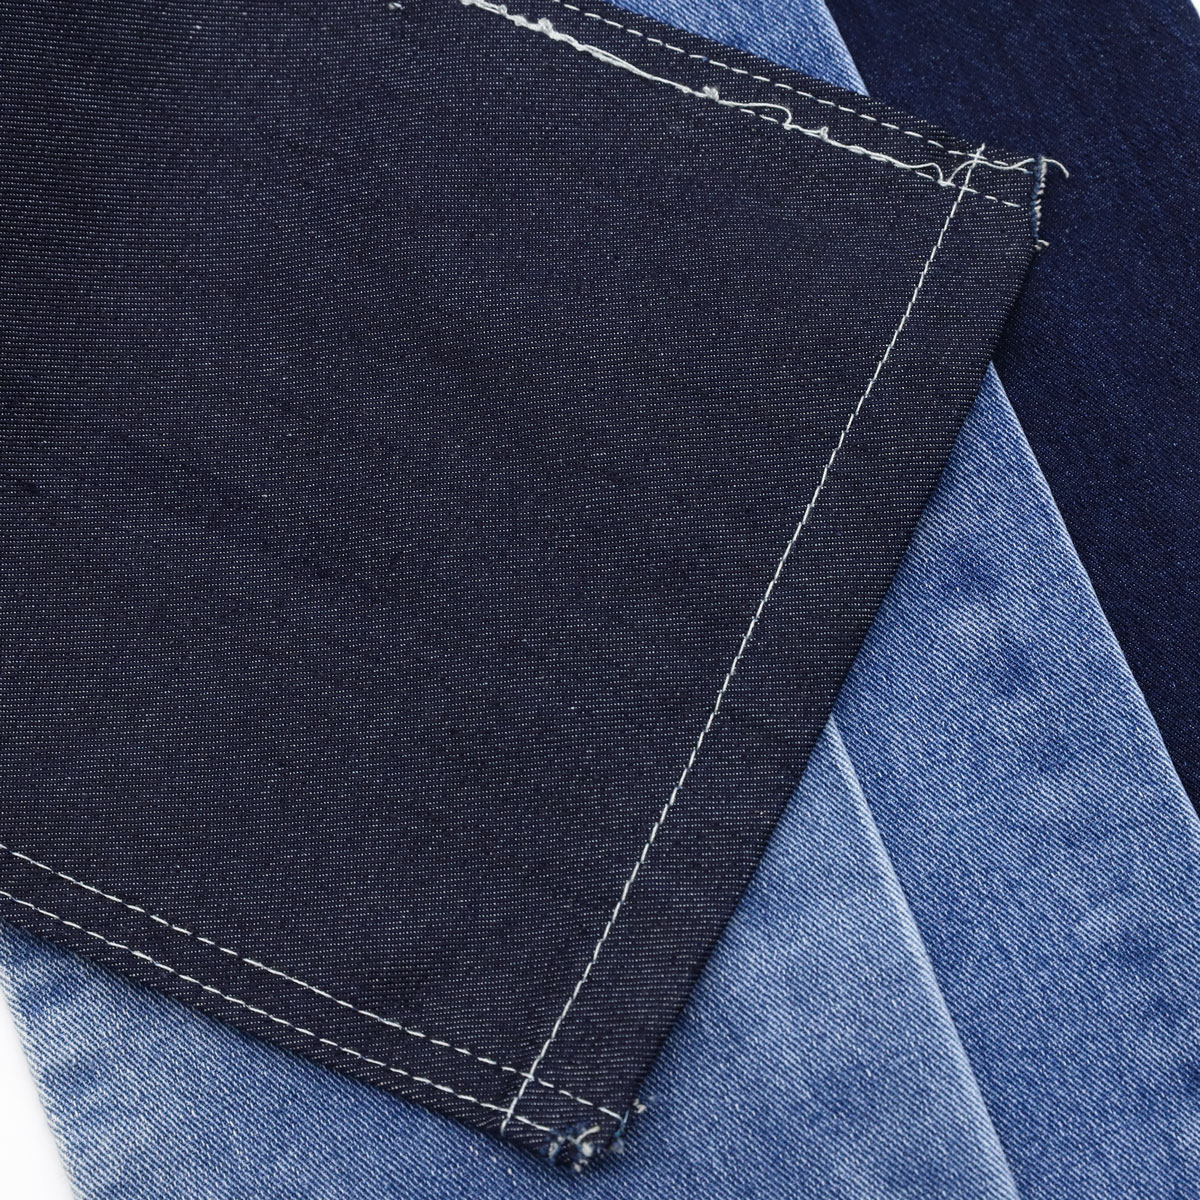 A Guide to Buy Premium Stretchable Denim Fabric 2